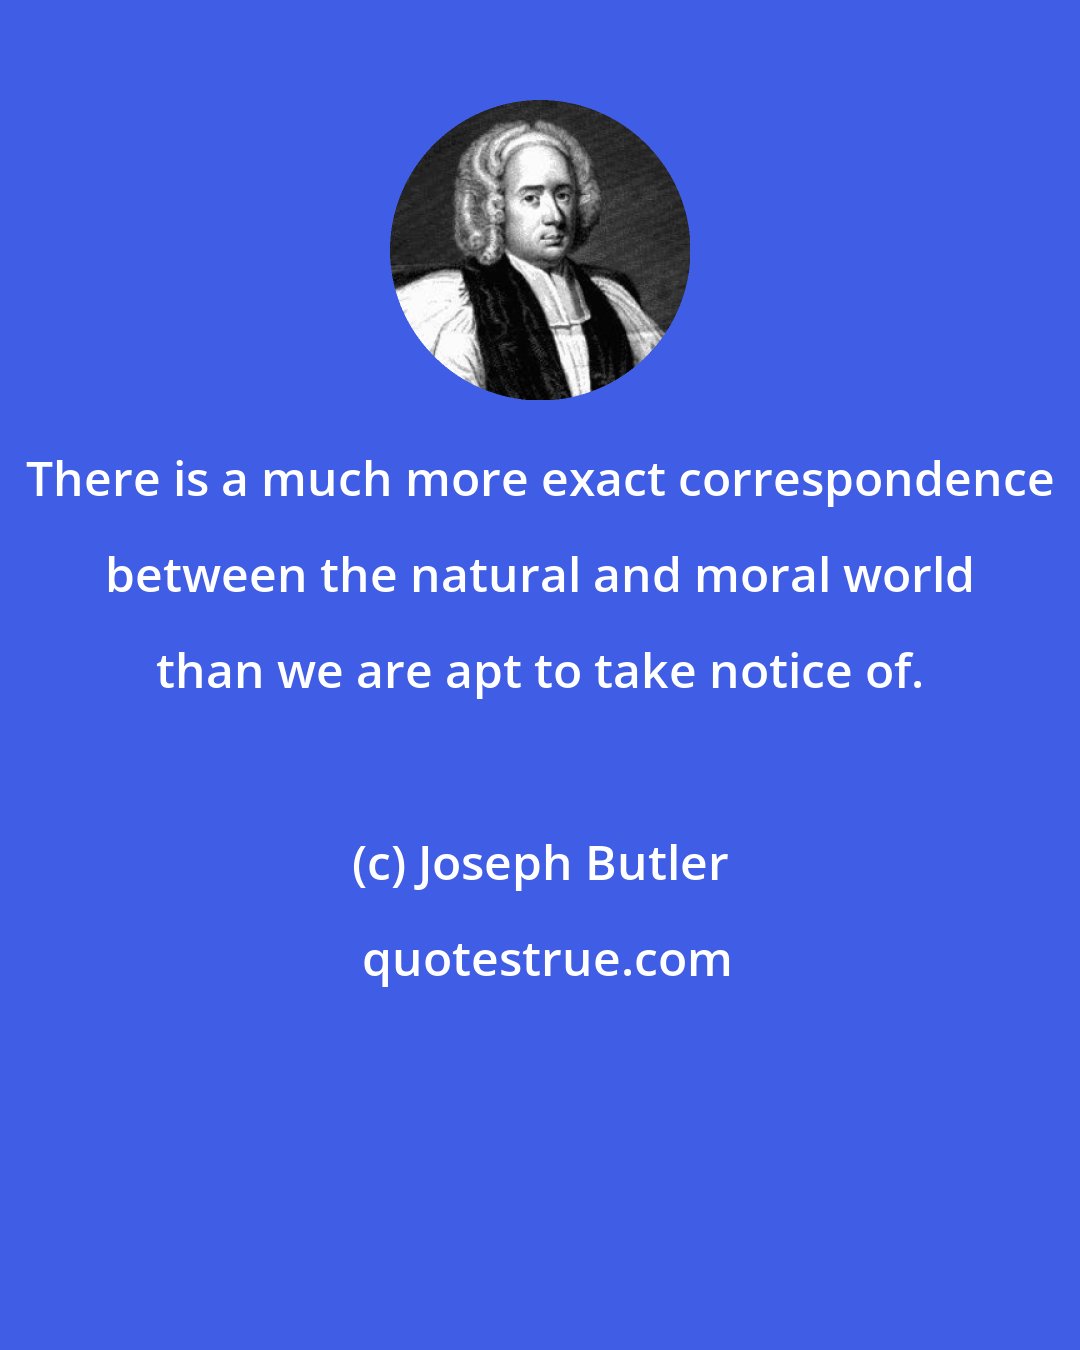 Joseph Butler: There is a much more exact correspondence between the natural and moral world than we are apt to take notice of.